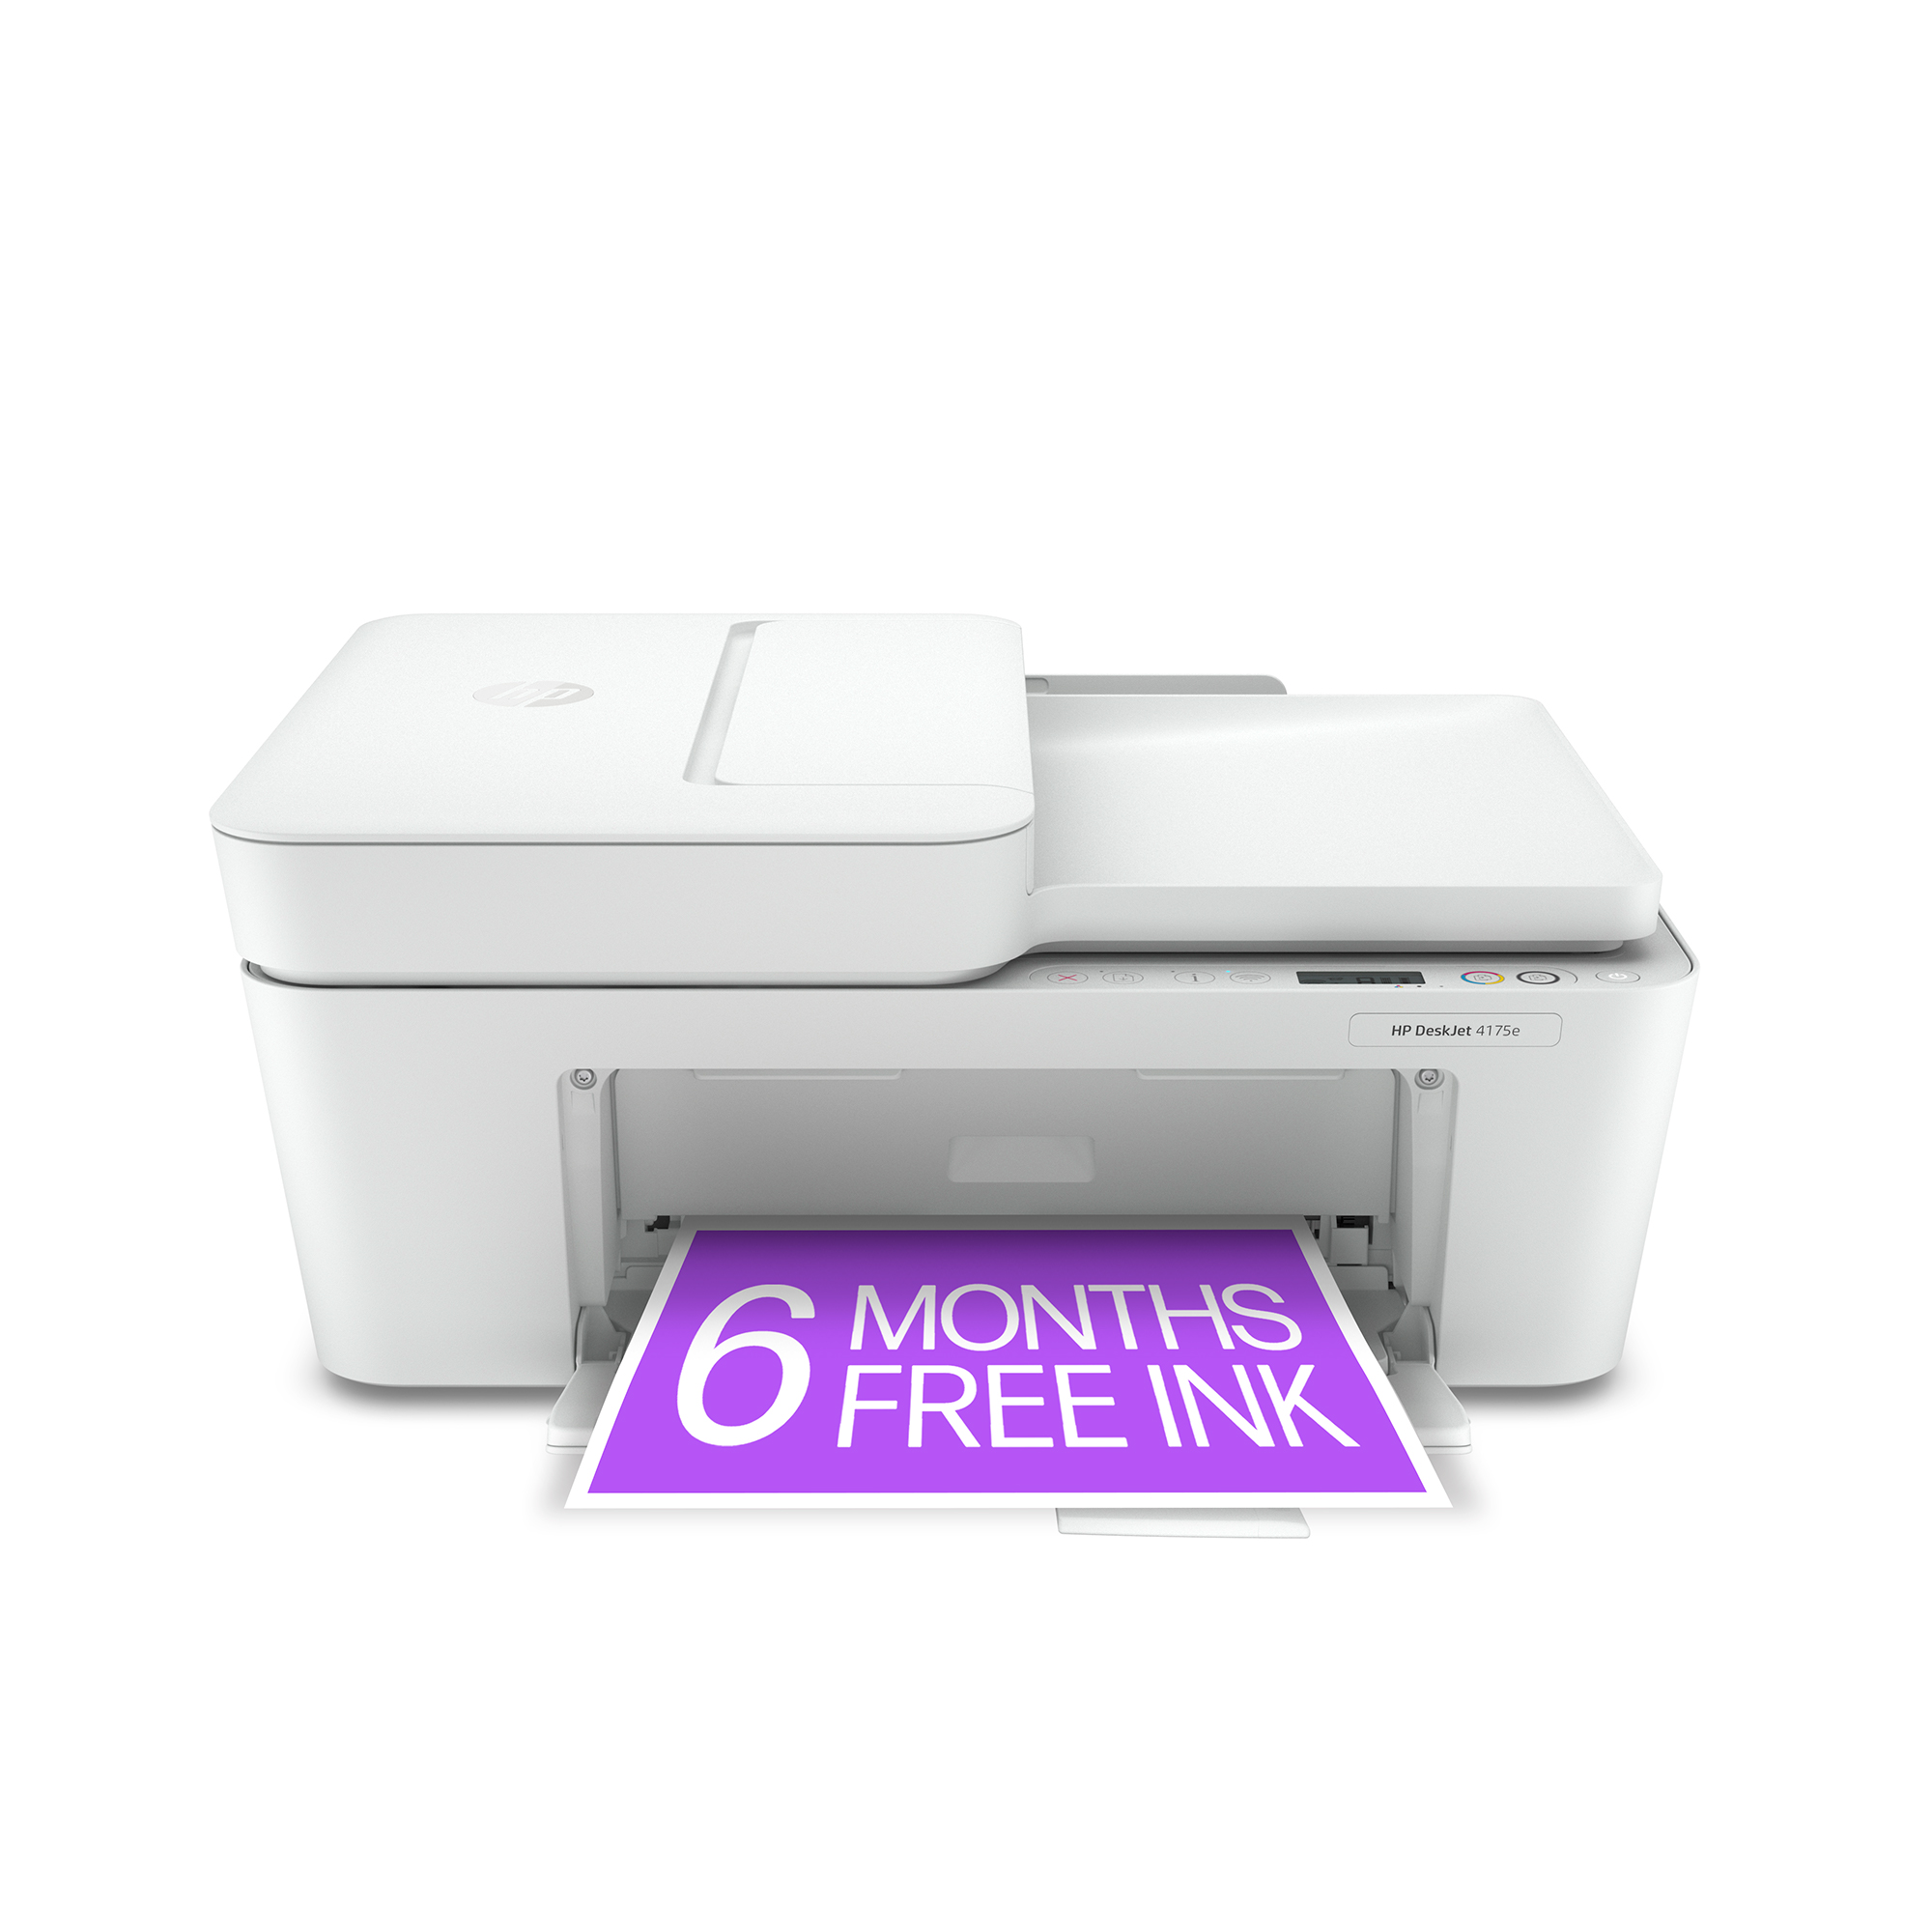 HP DeskJet 4175e Wireless Color All-in-One Inkjet Printer with 6 months Instant Ink included with HP+ - image 1 of 15